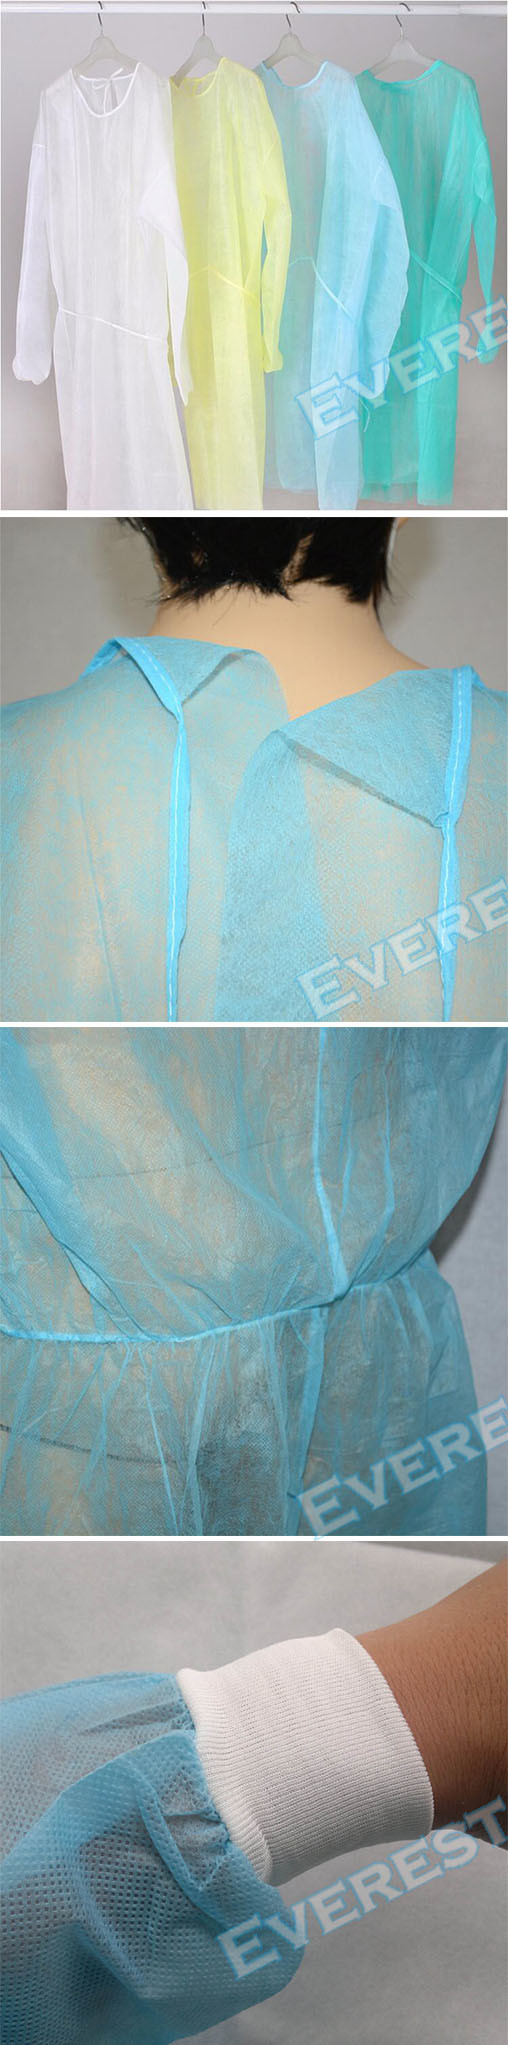 SMS Steriled Surgical Gown, Disposable Surgical Gown, Surgical Gown